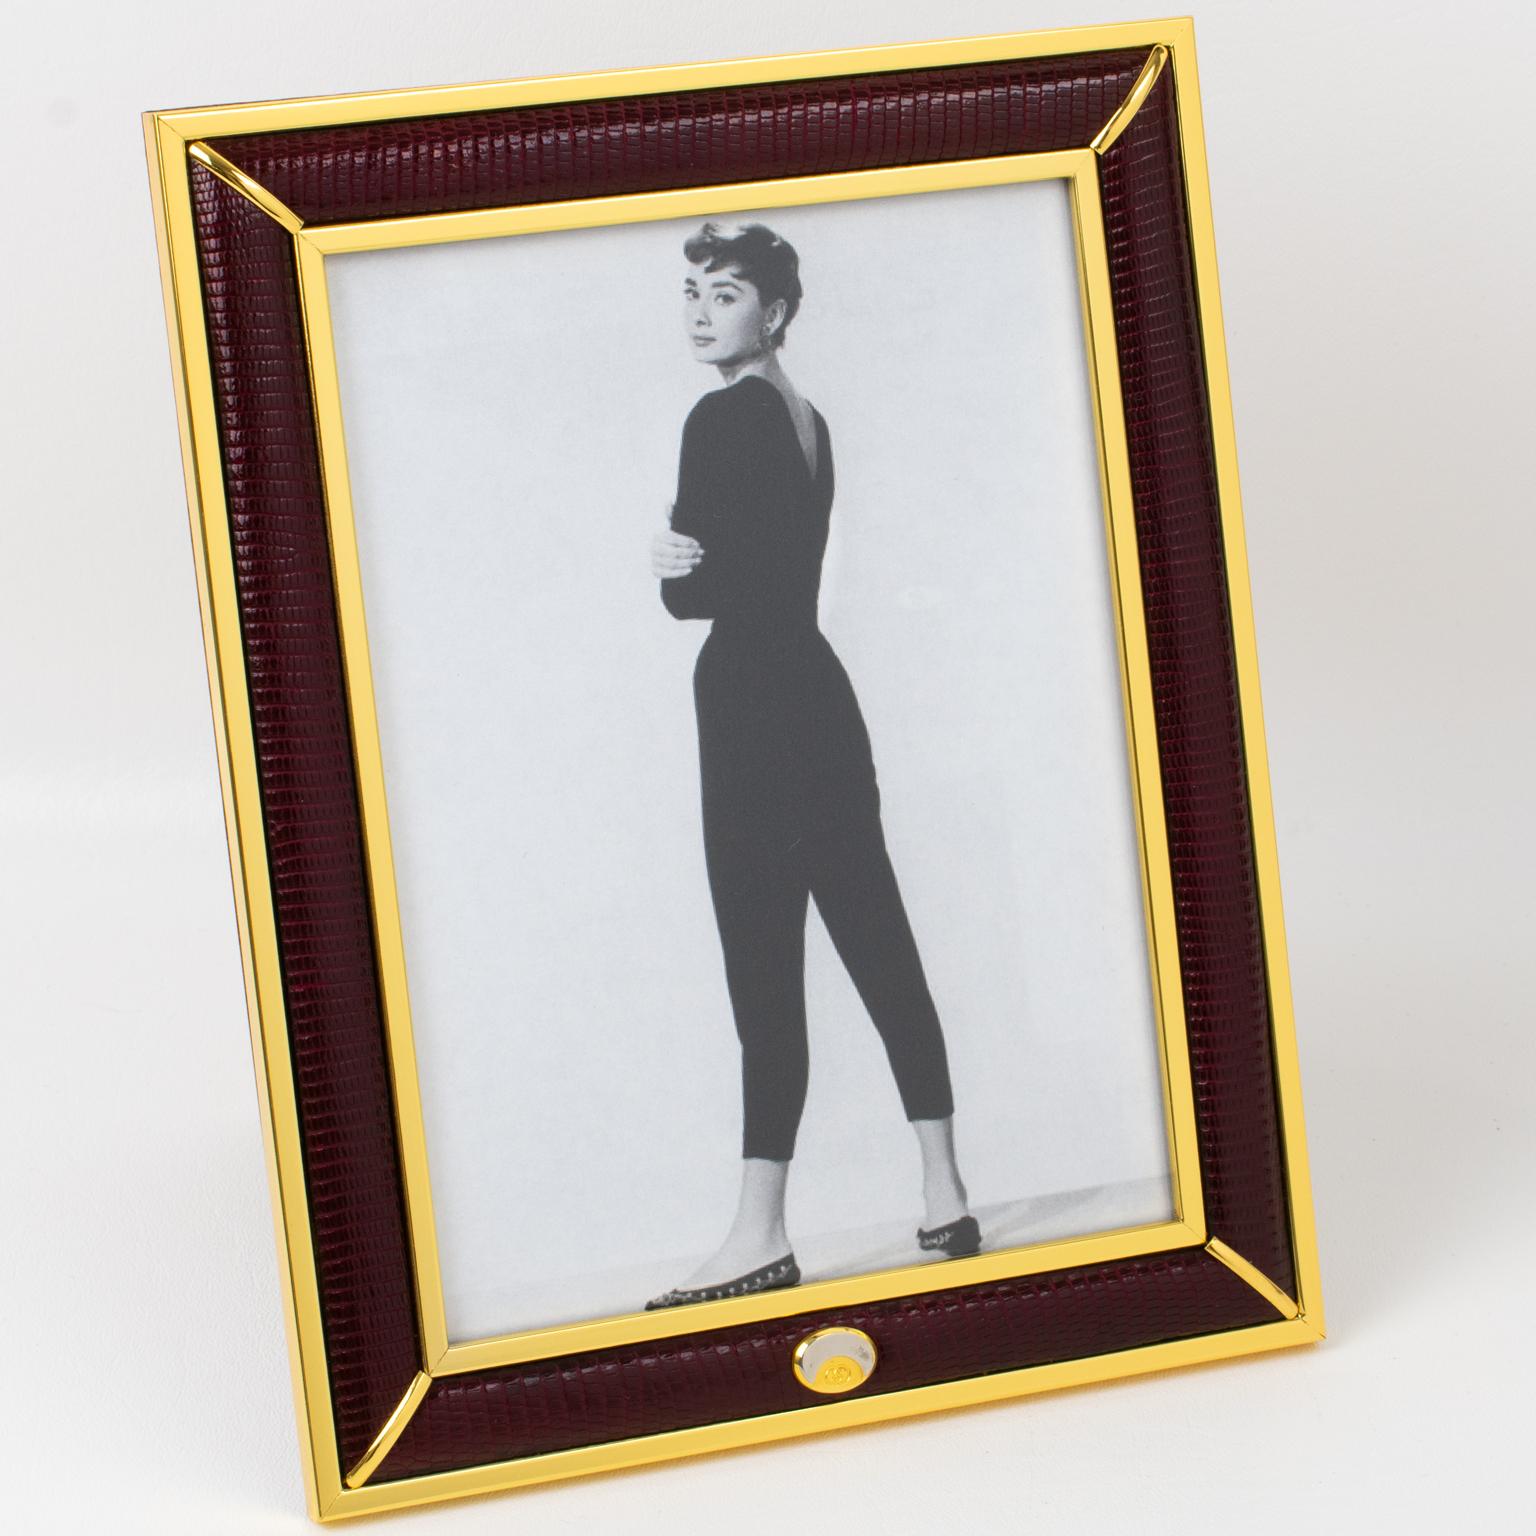 Superb picture photo frame by Italian designer Gucci. Timeless and elegant burgundy red lizard skin leather compliments with gilded brass decor. Chrome and brass 